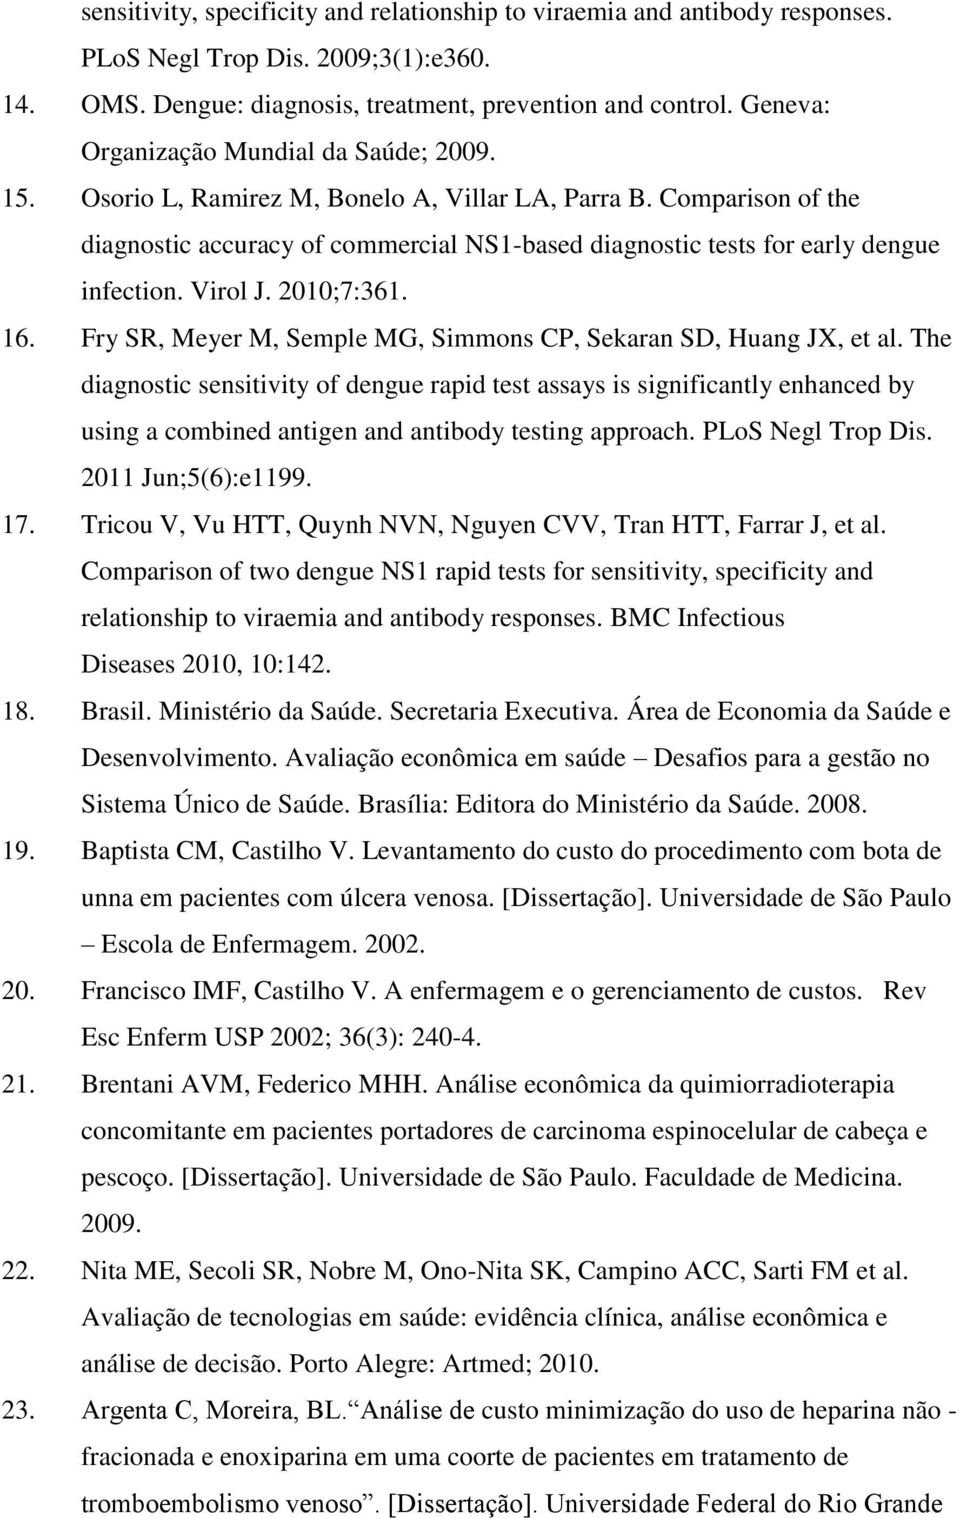 Comparison of the diagnostic accuracy of commercial NS1-based diagnostic tests for early dengue infection. Virol J. 2010;7:361. 16. Fry SR, Meyer M, Semple MG, Simmons CP, Sekaran SD, Huang JX, et al.